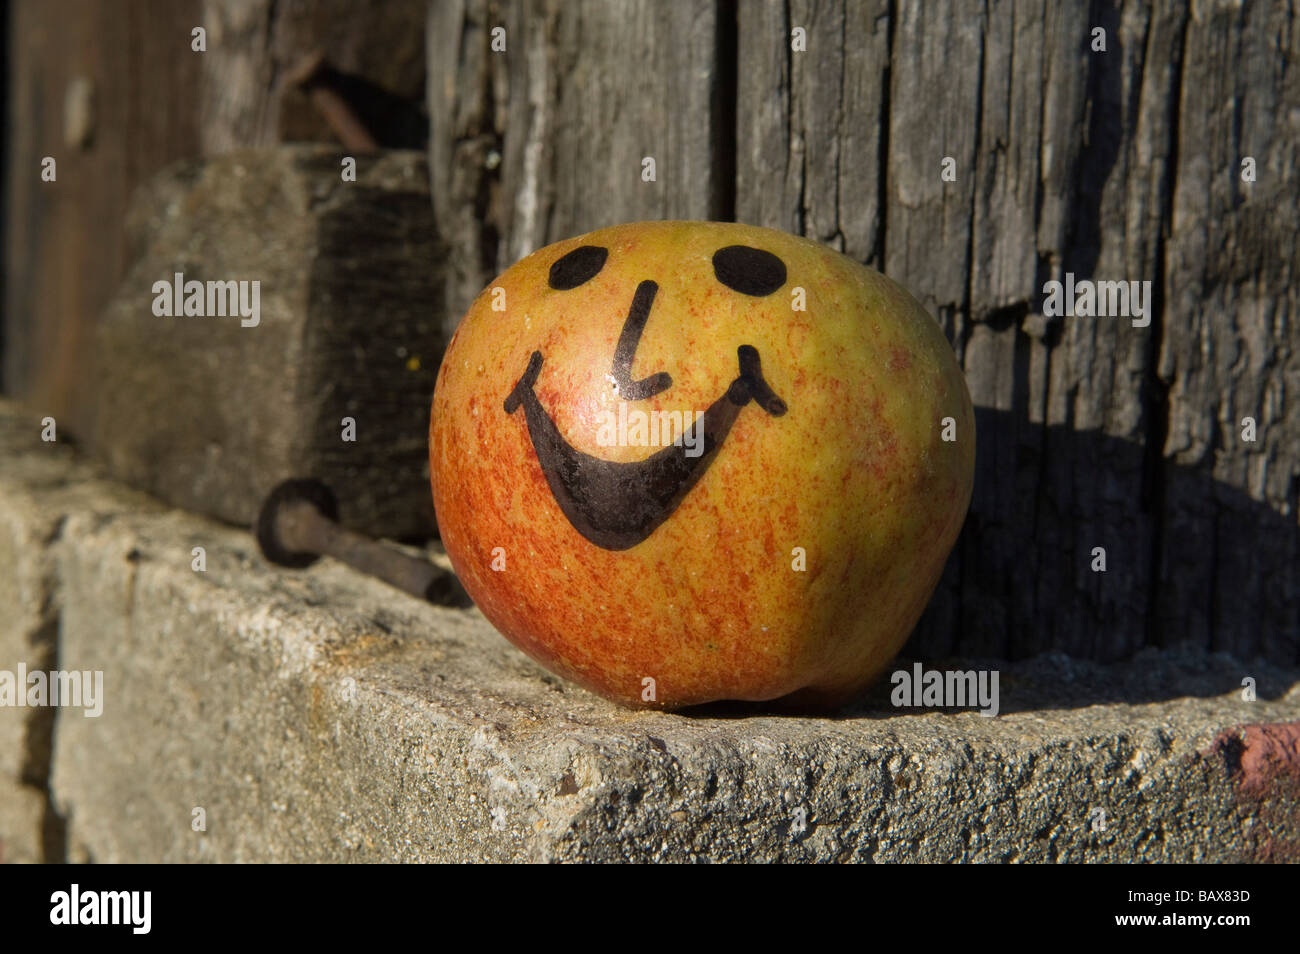 A happy Apple at Julian Temperley s Cider Cider Brandy orchard at Burrow Hill Kingsbury Episcopi Somerset England Stock Photo